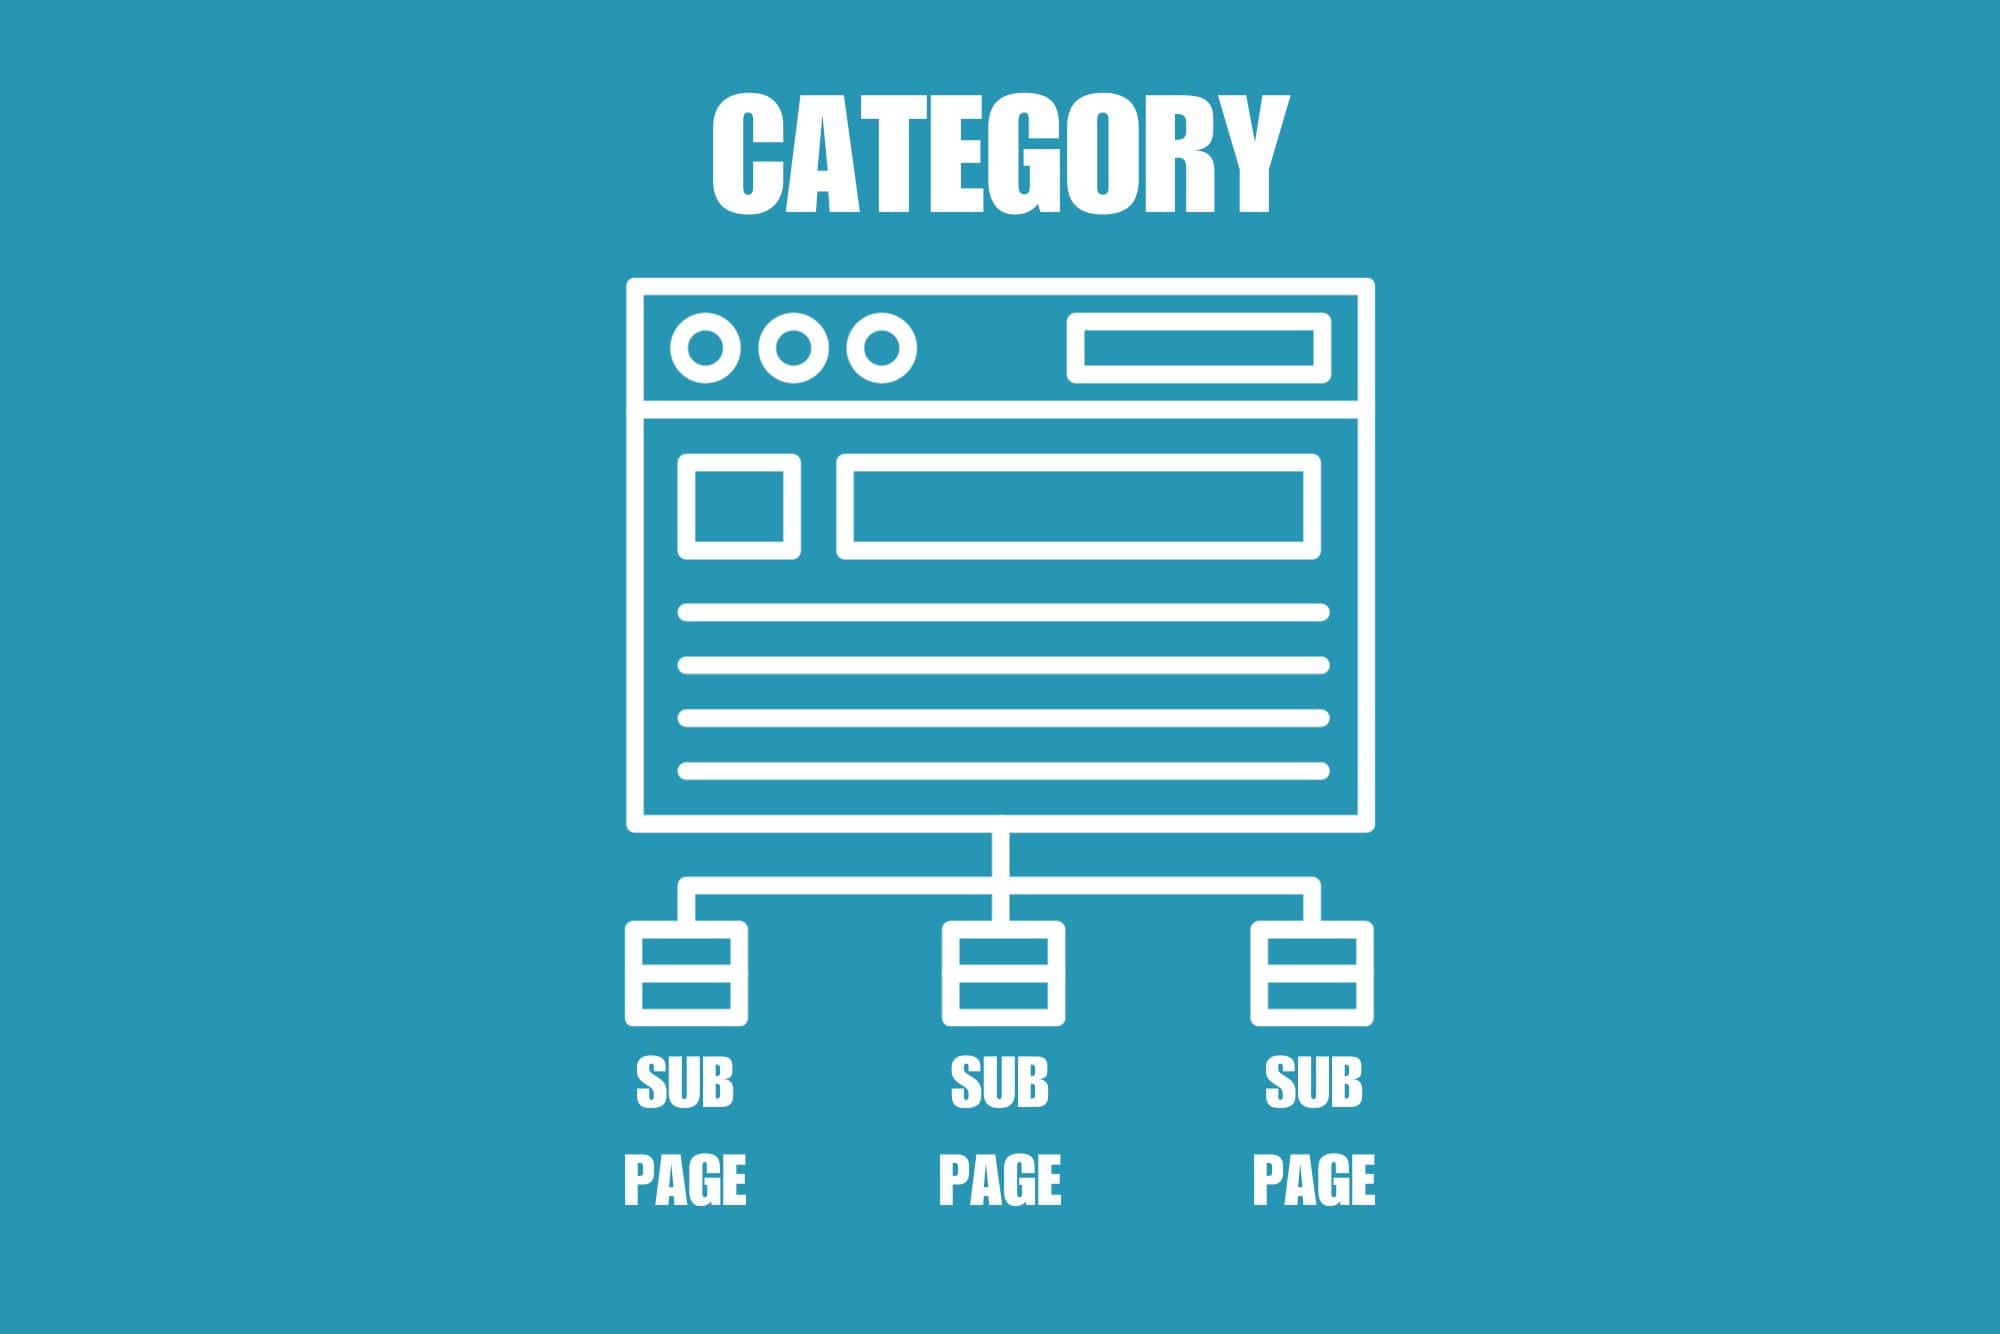 Representation of a basic site structure with a category and sub pages